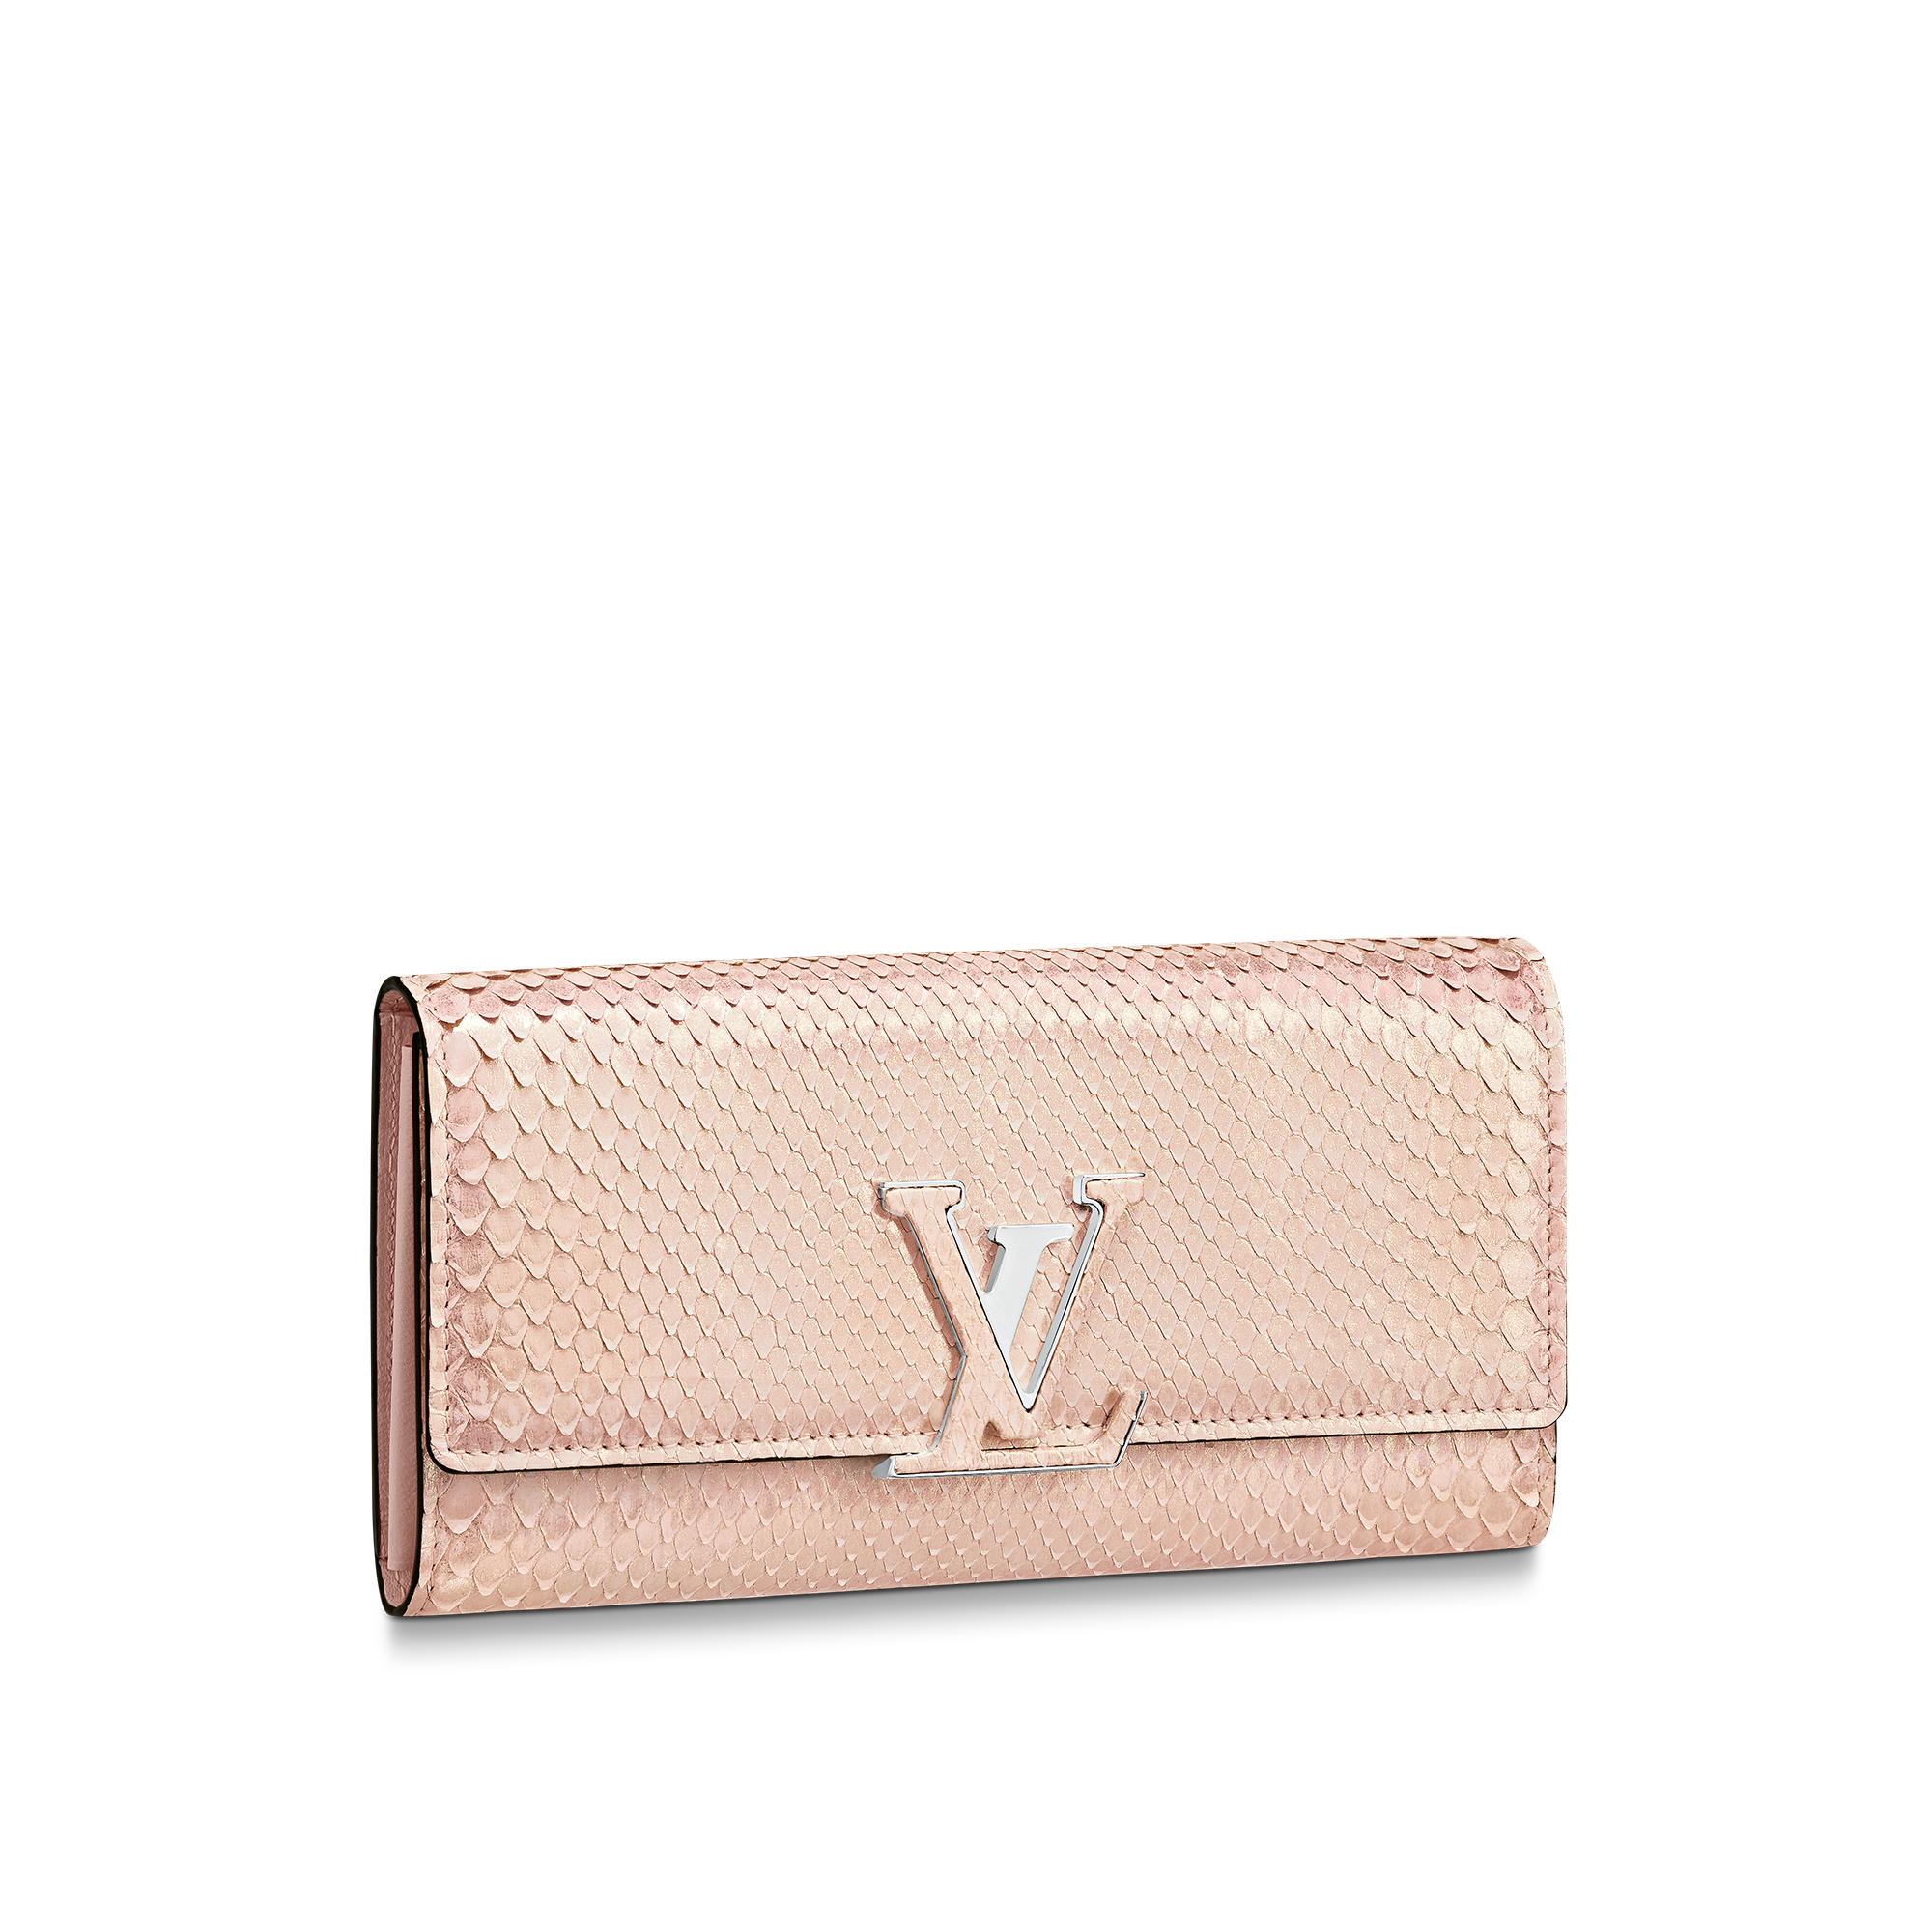 Louis Vuitton Capucines Wallet Python in Pink – WOMEN – Small Leather Goods N96360